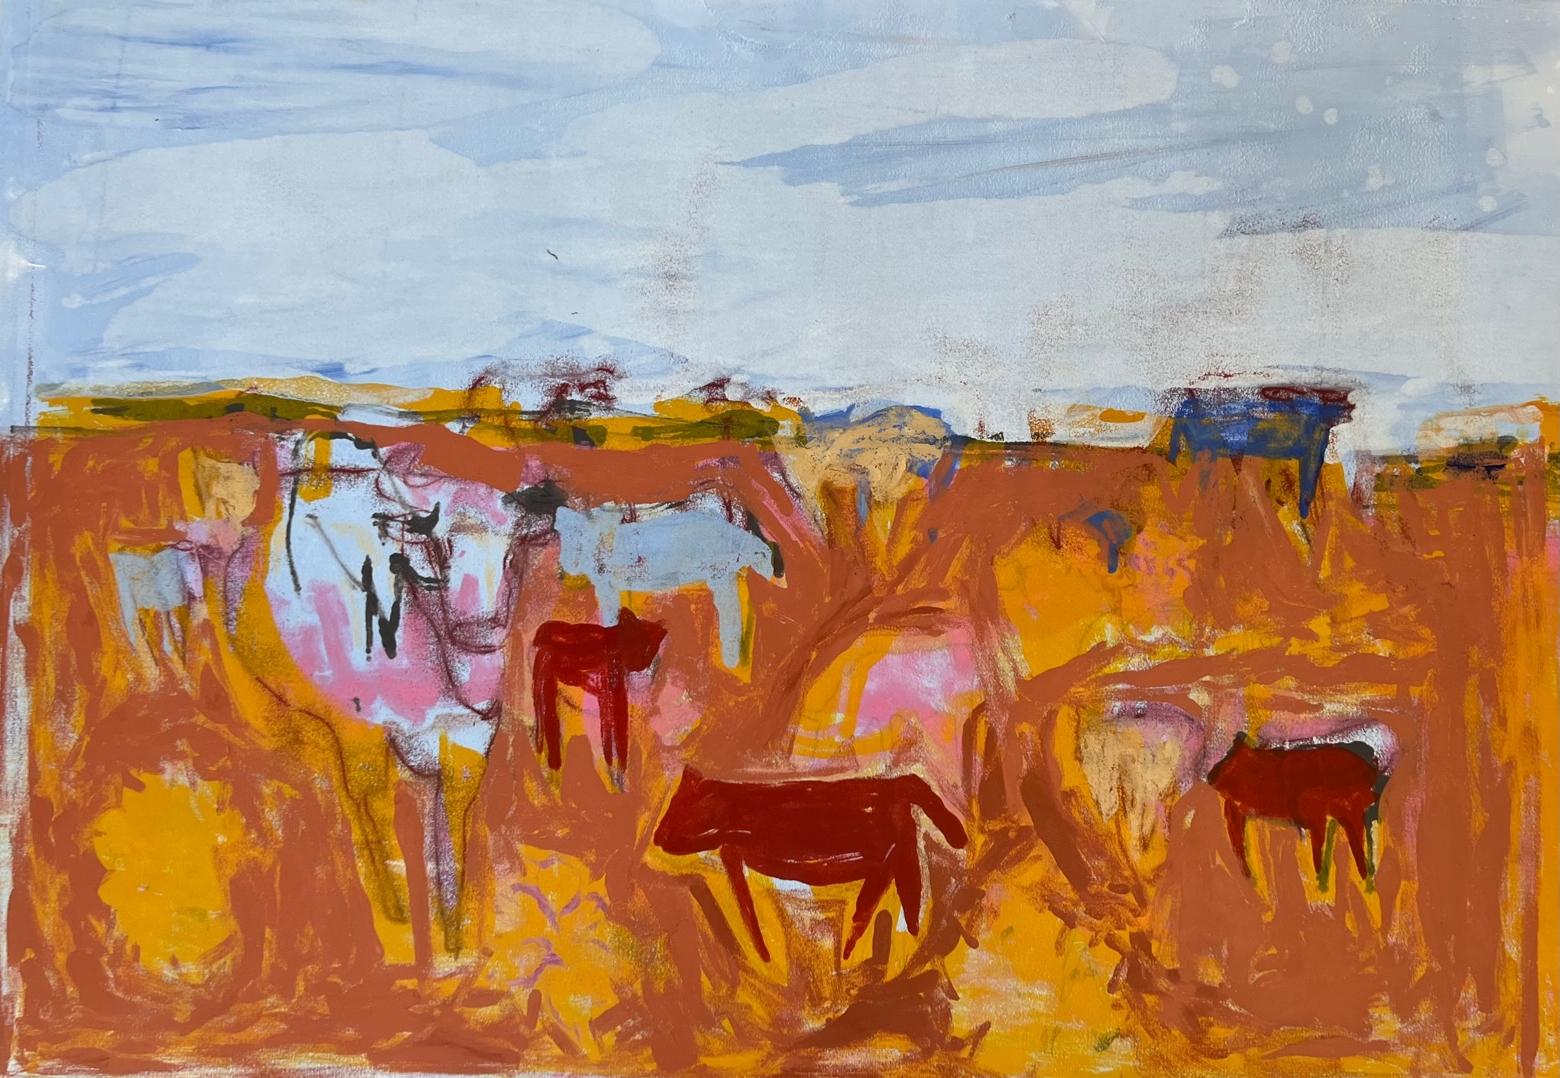 COWS Monotype 31 x 44  Abstract Figurative Art   Framed 37 x 50  Cattle 4